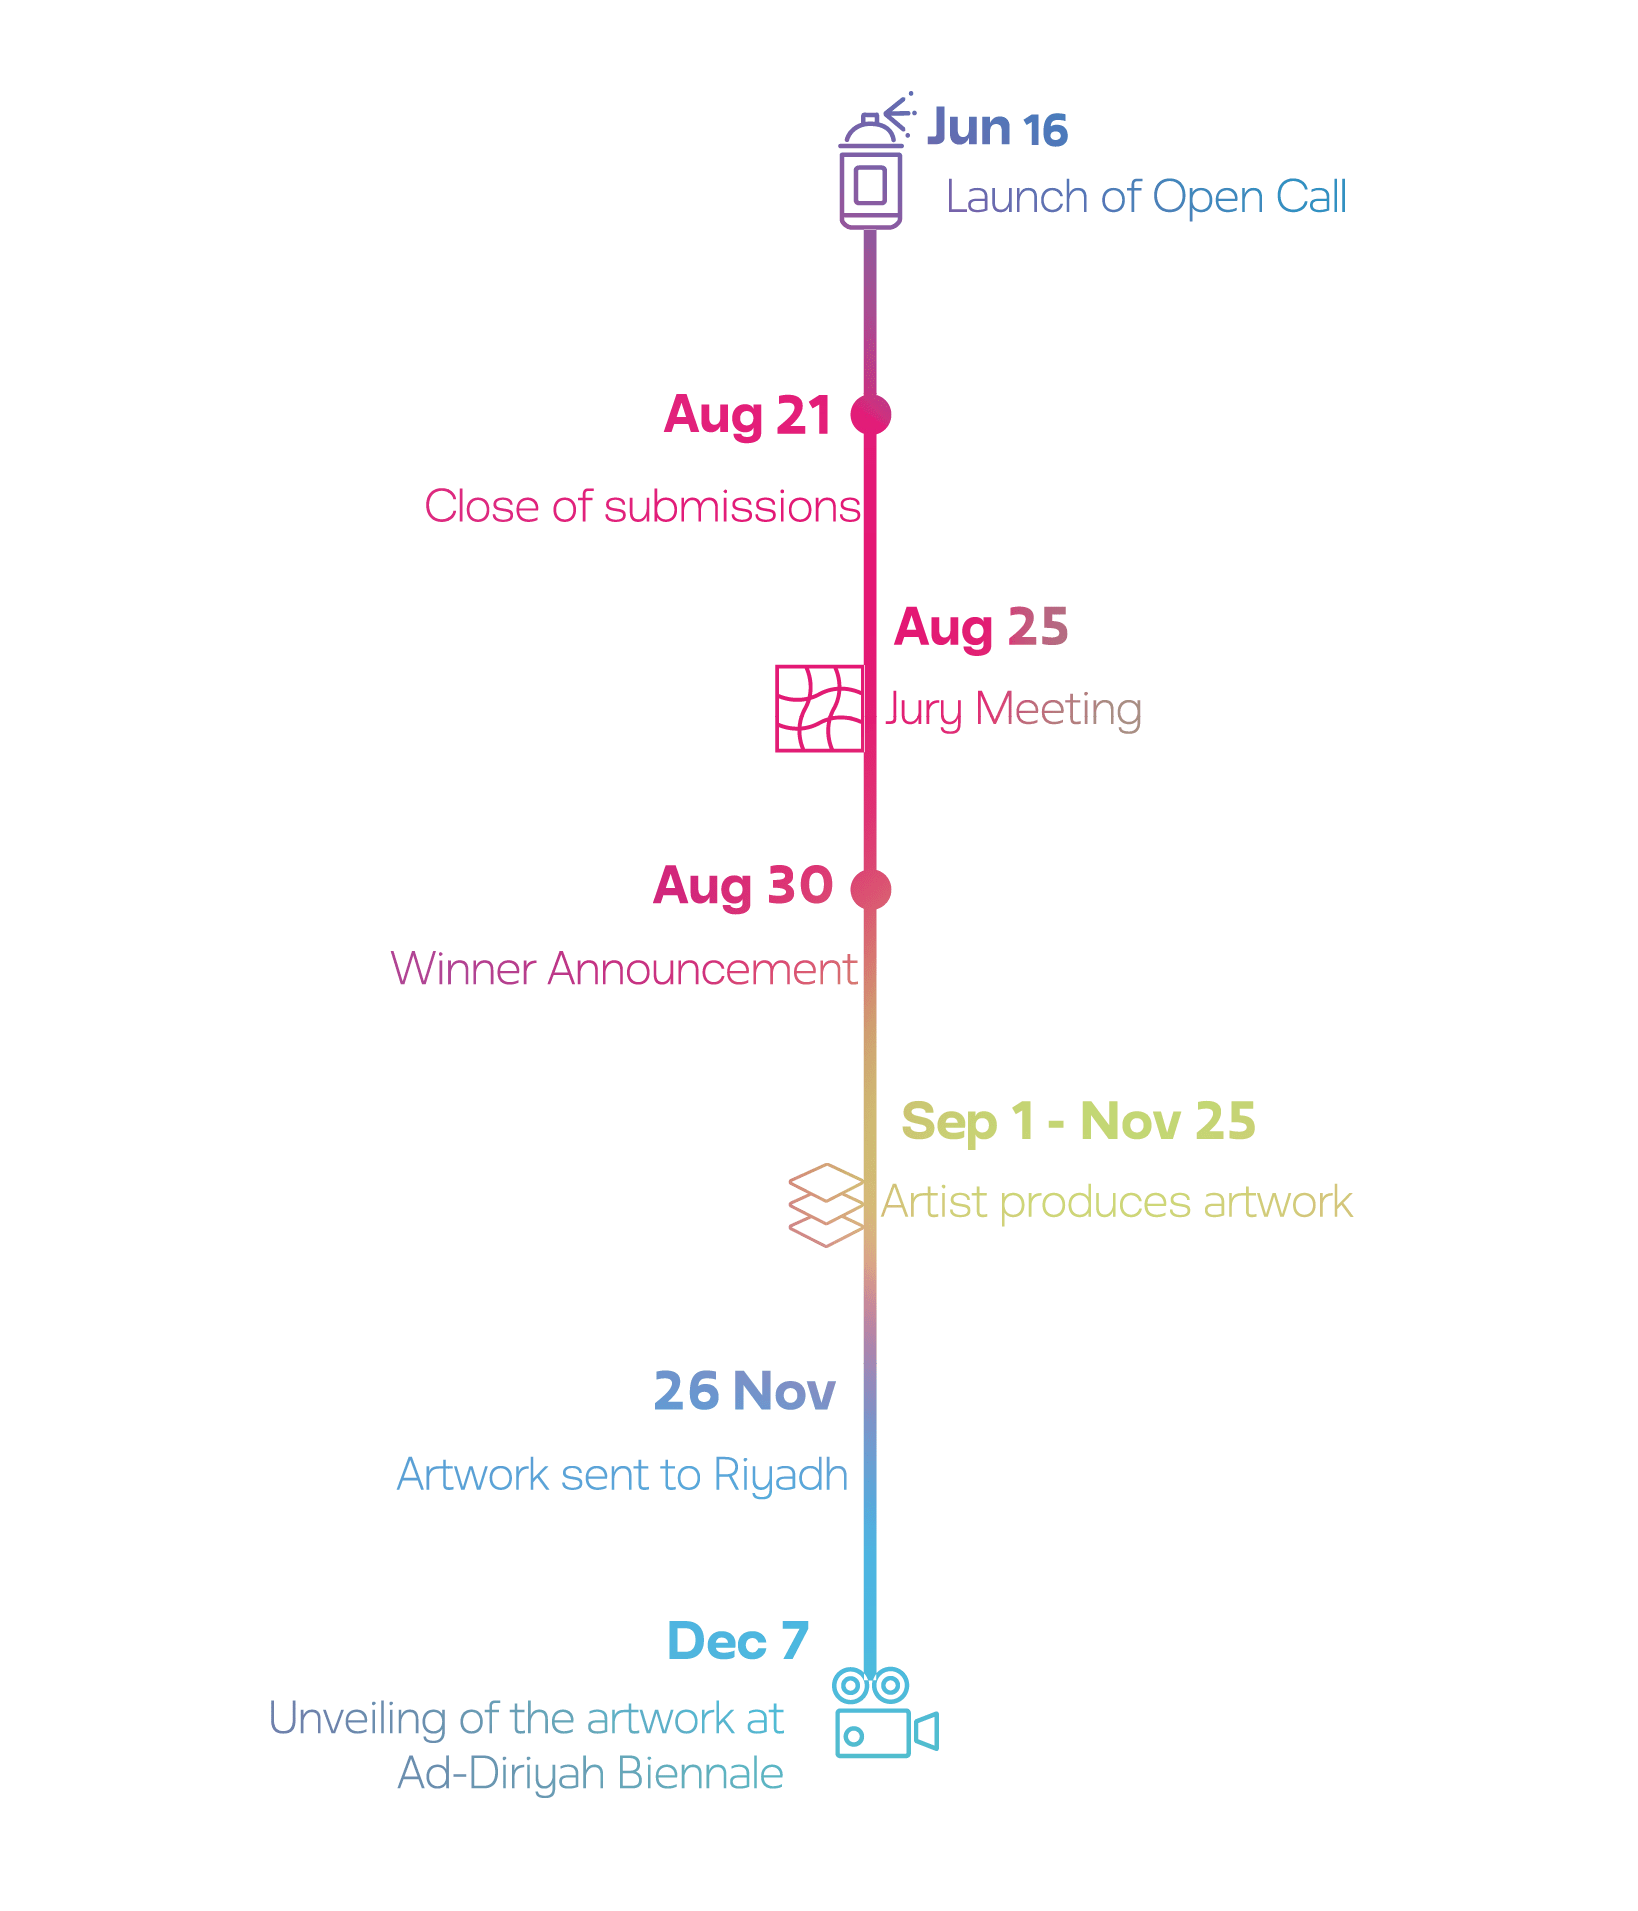 ithra_art_prize2_timeline_updated_august-26-min.png